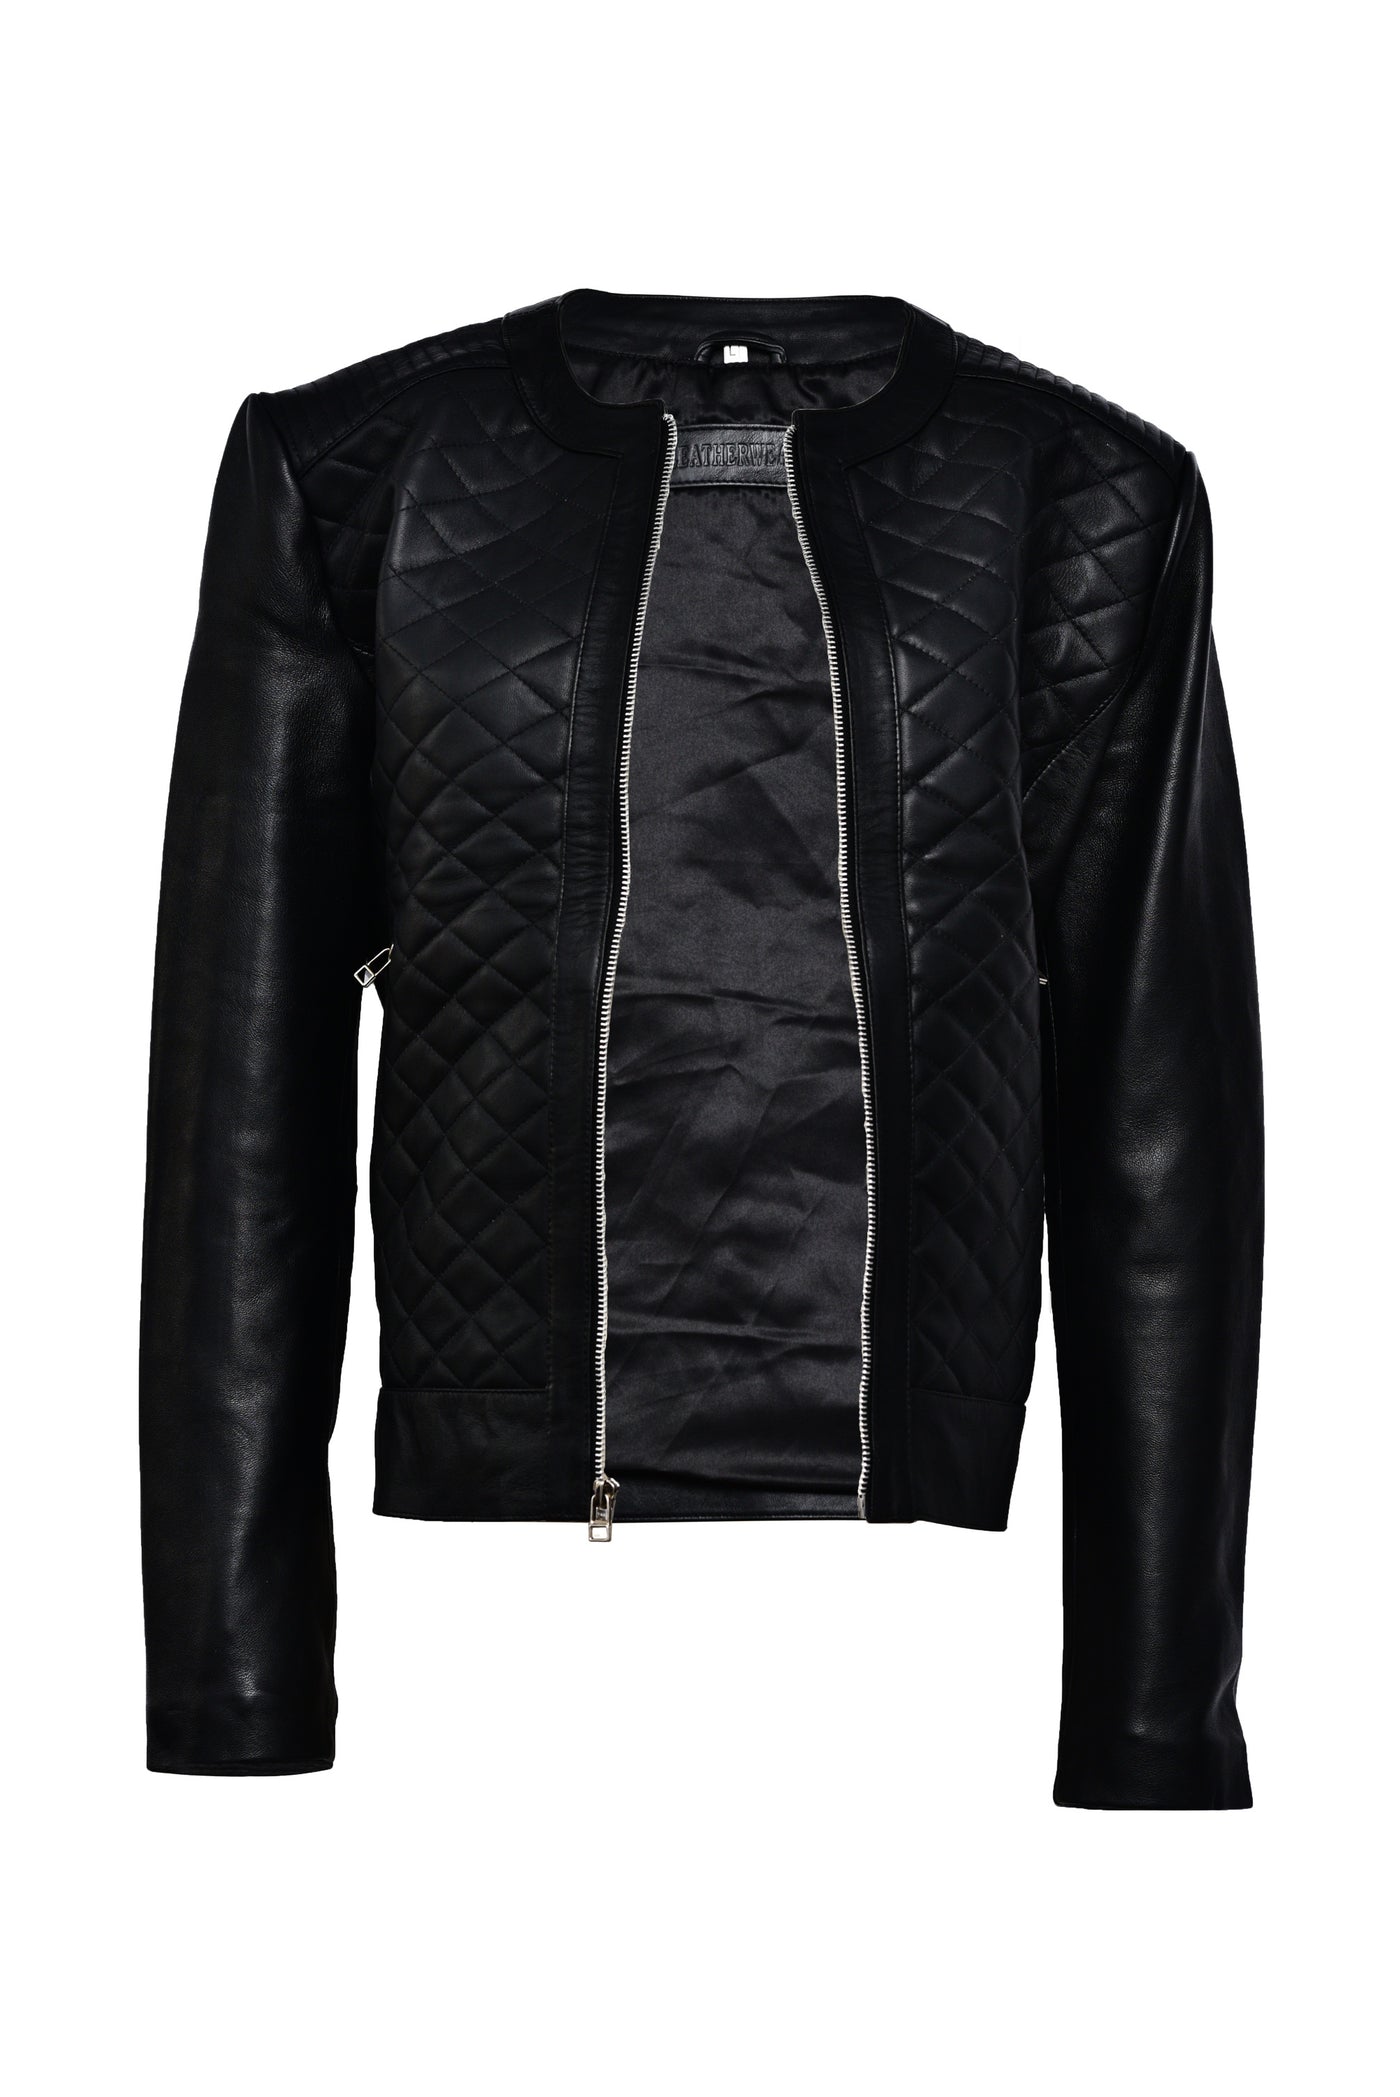 Round Neck Leather Jacket For Women